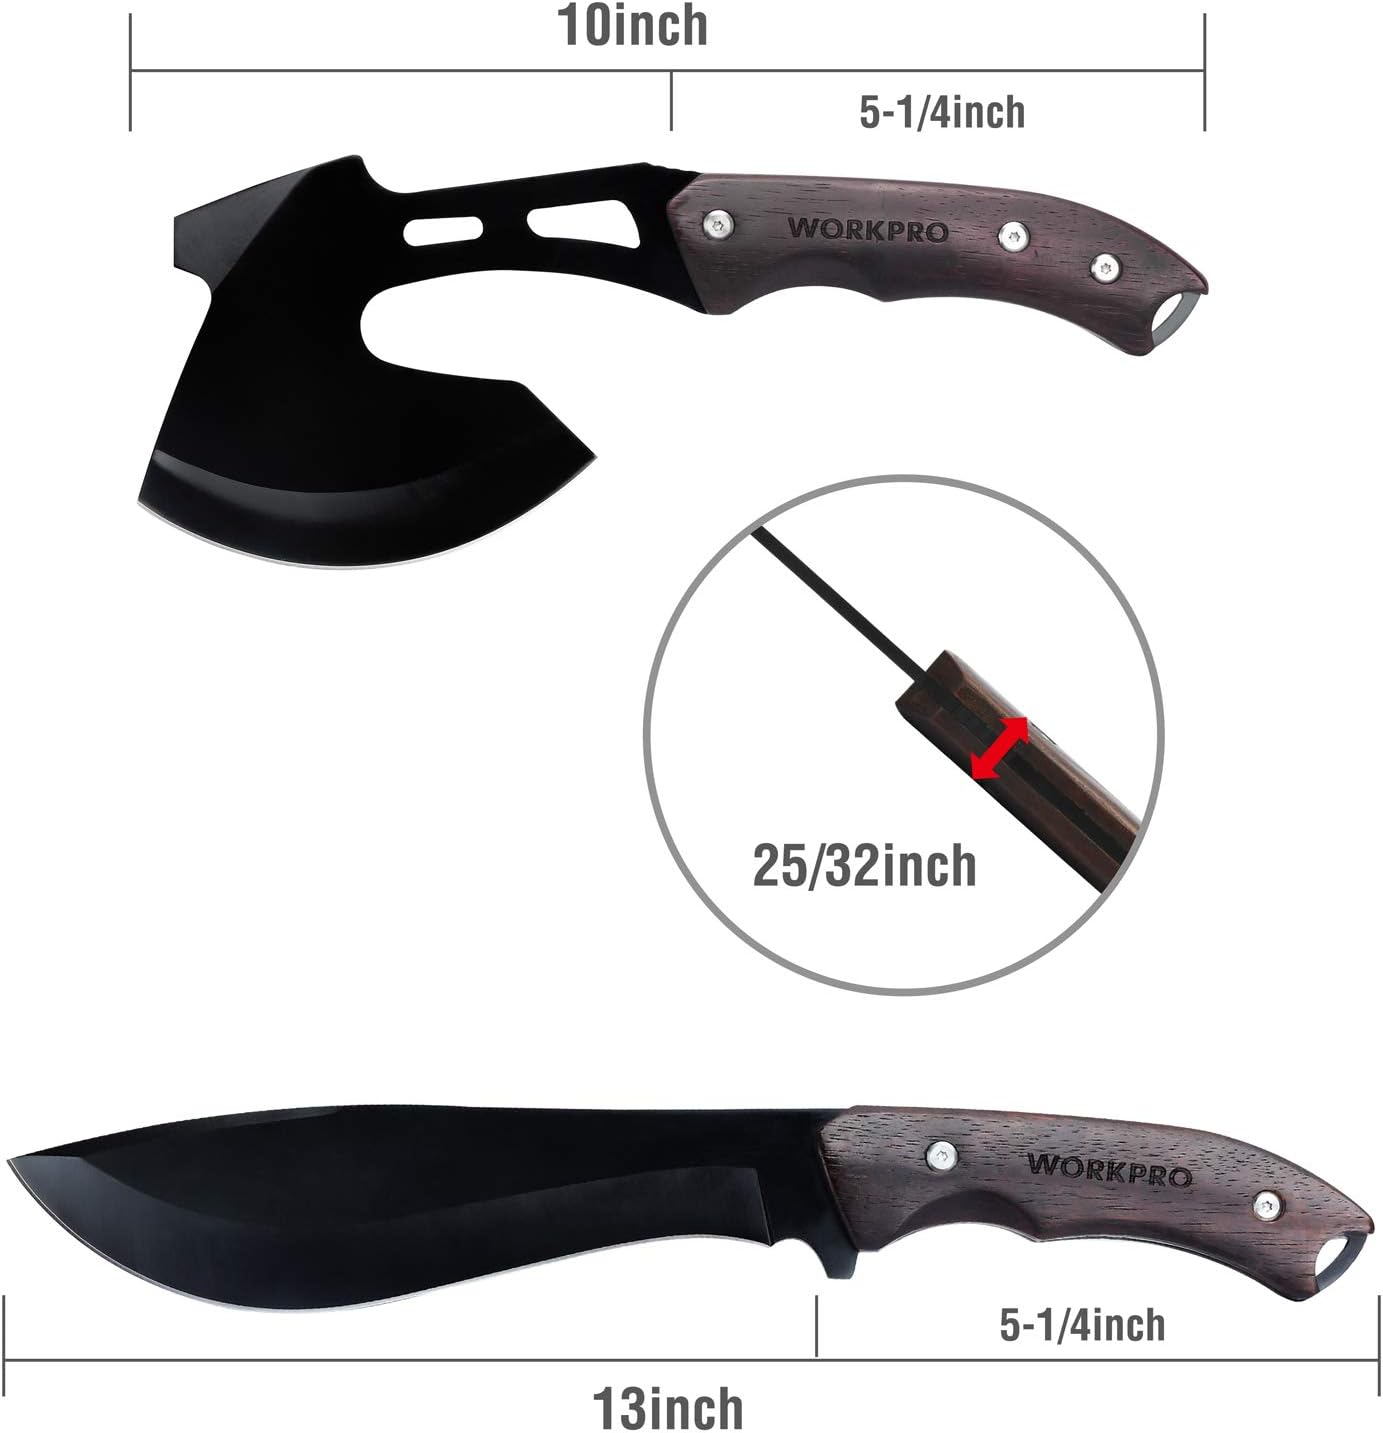 WorkPro Axe & Knife Set: Reliable Outdoor Toolset